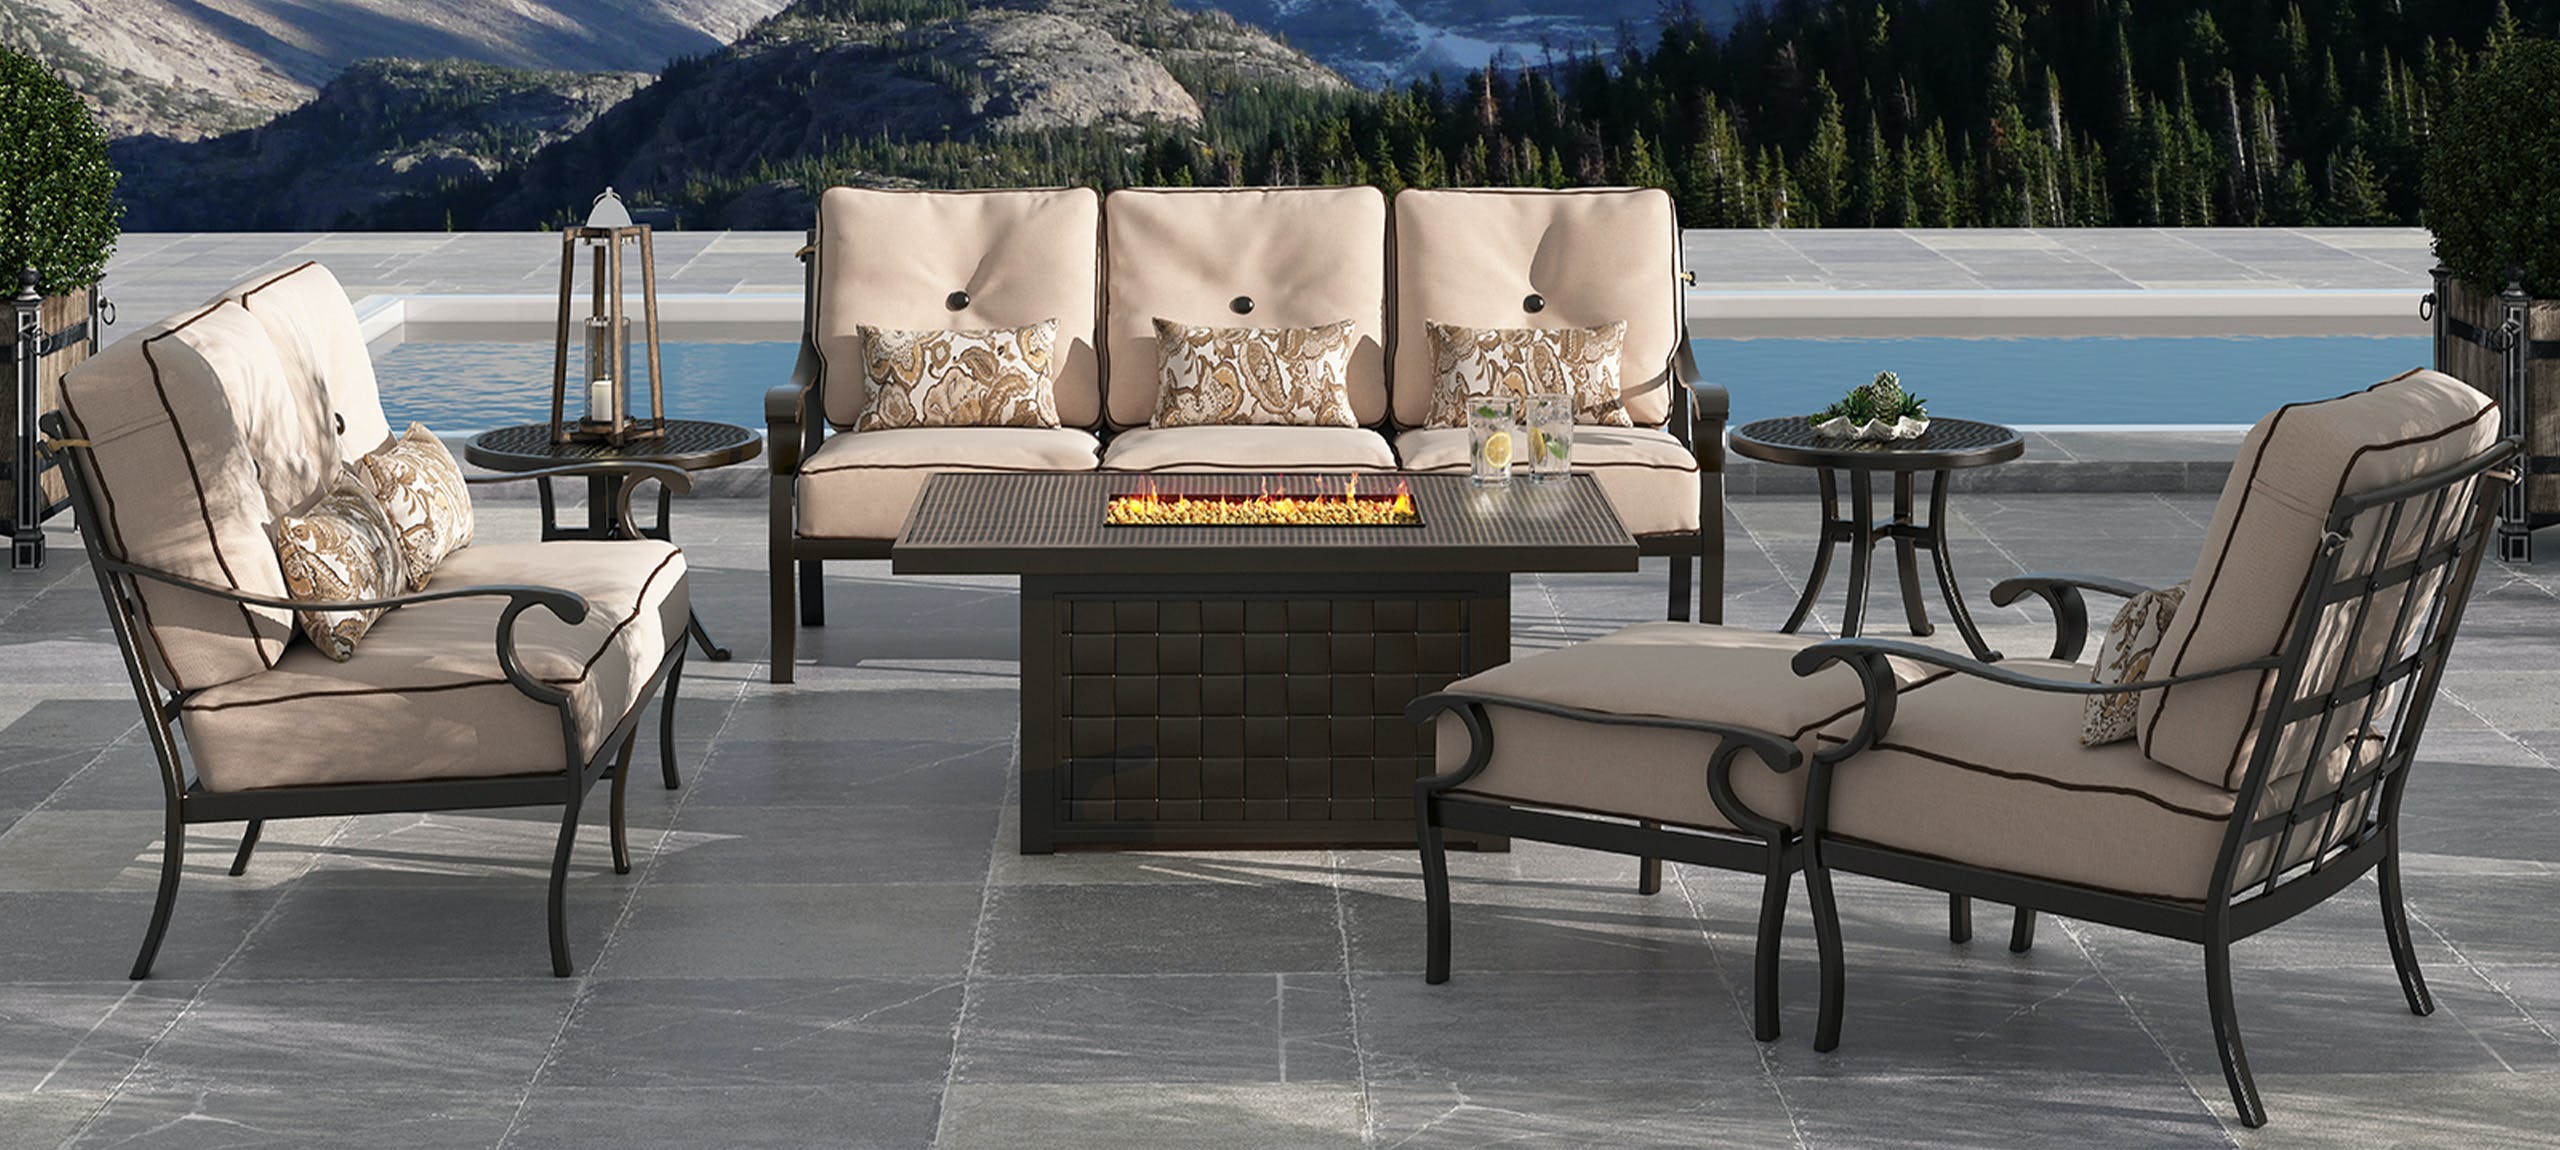 Classical 36" x 52" Rectangular Coffee Table with Firepit By Castelle